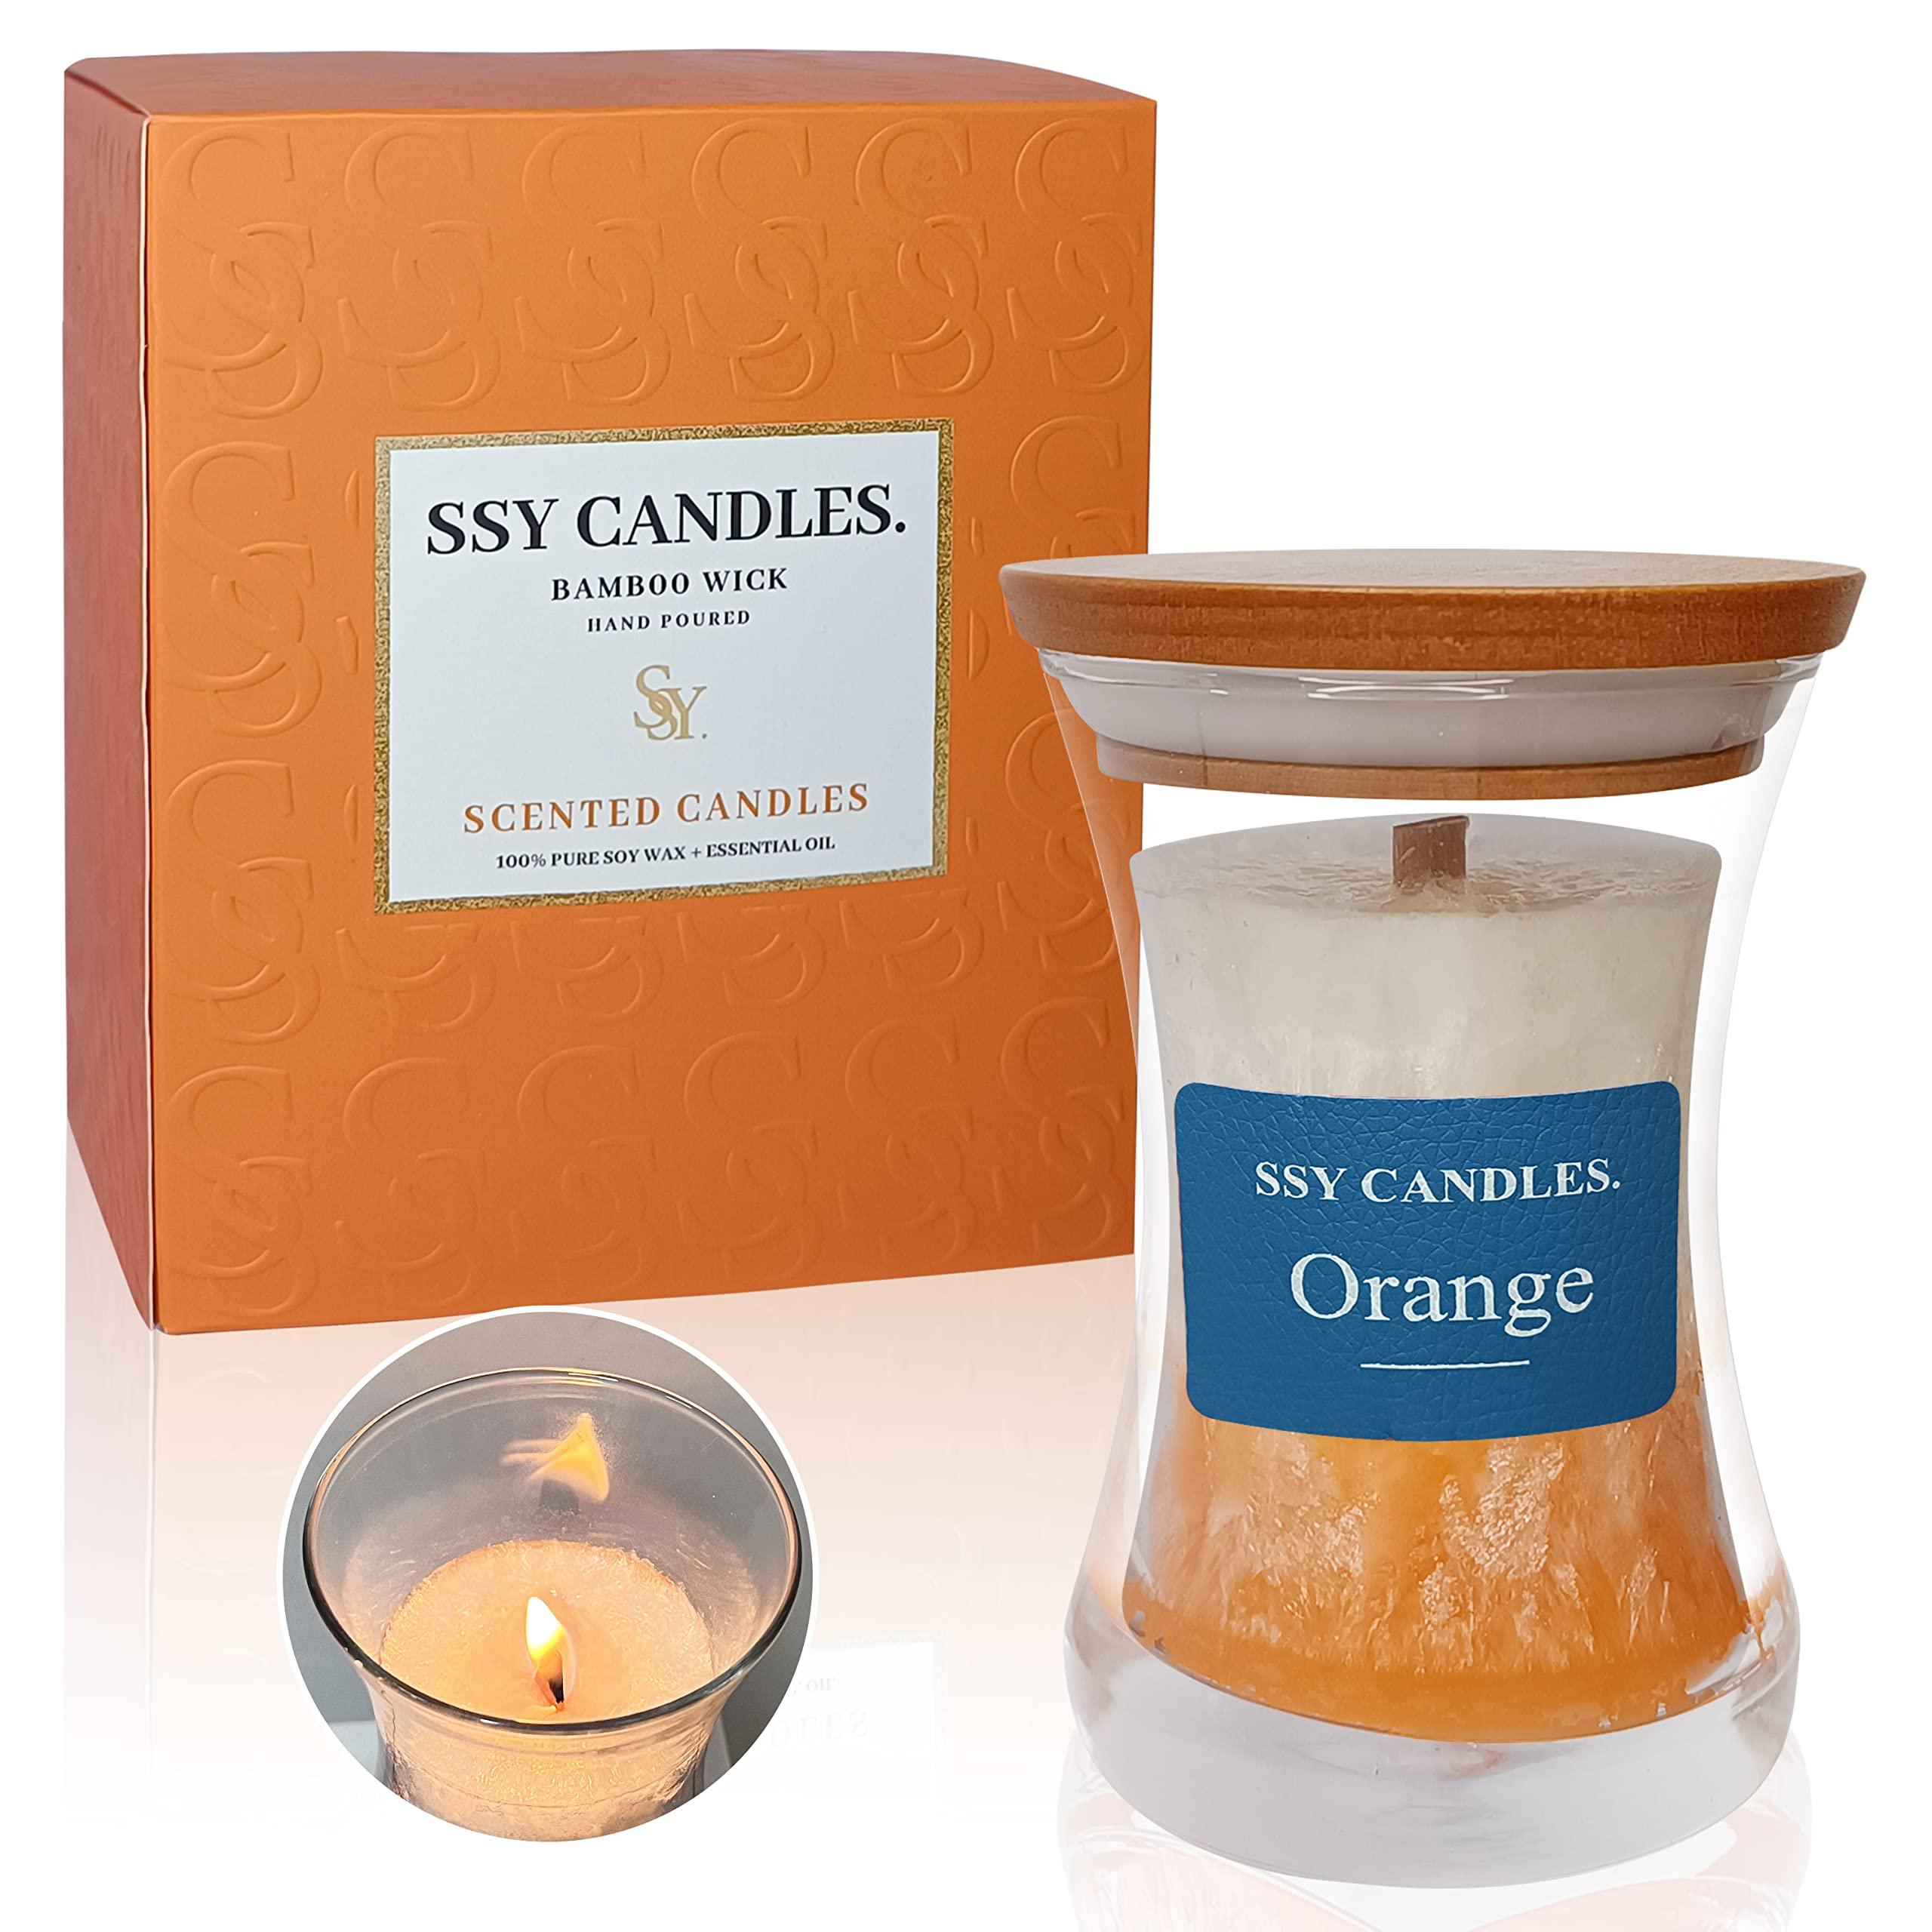 Experience Relaxation with Our Scented Jar Candle - 100% Natural Soy Wax, Burns up to 45 Hours, Aromatherapy Candle Gift for Any Occasion (#5 Single Sea Salt)